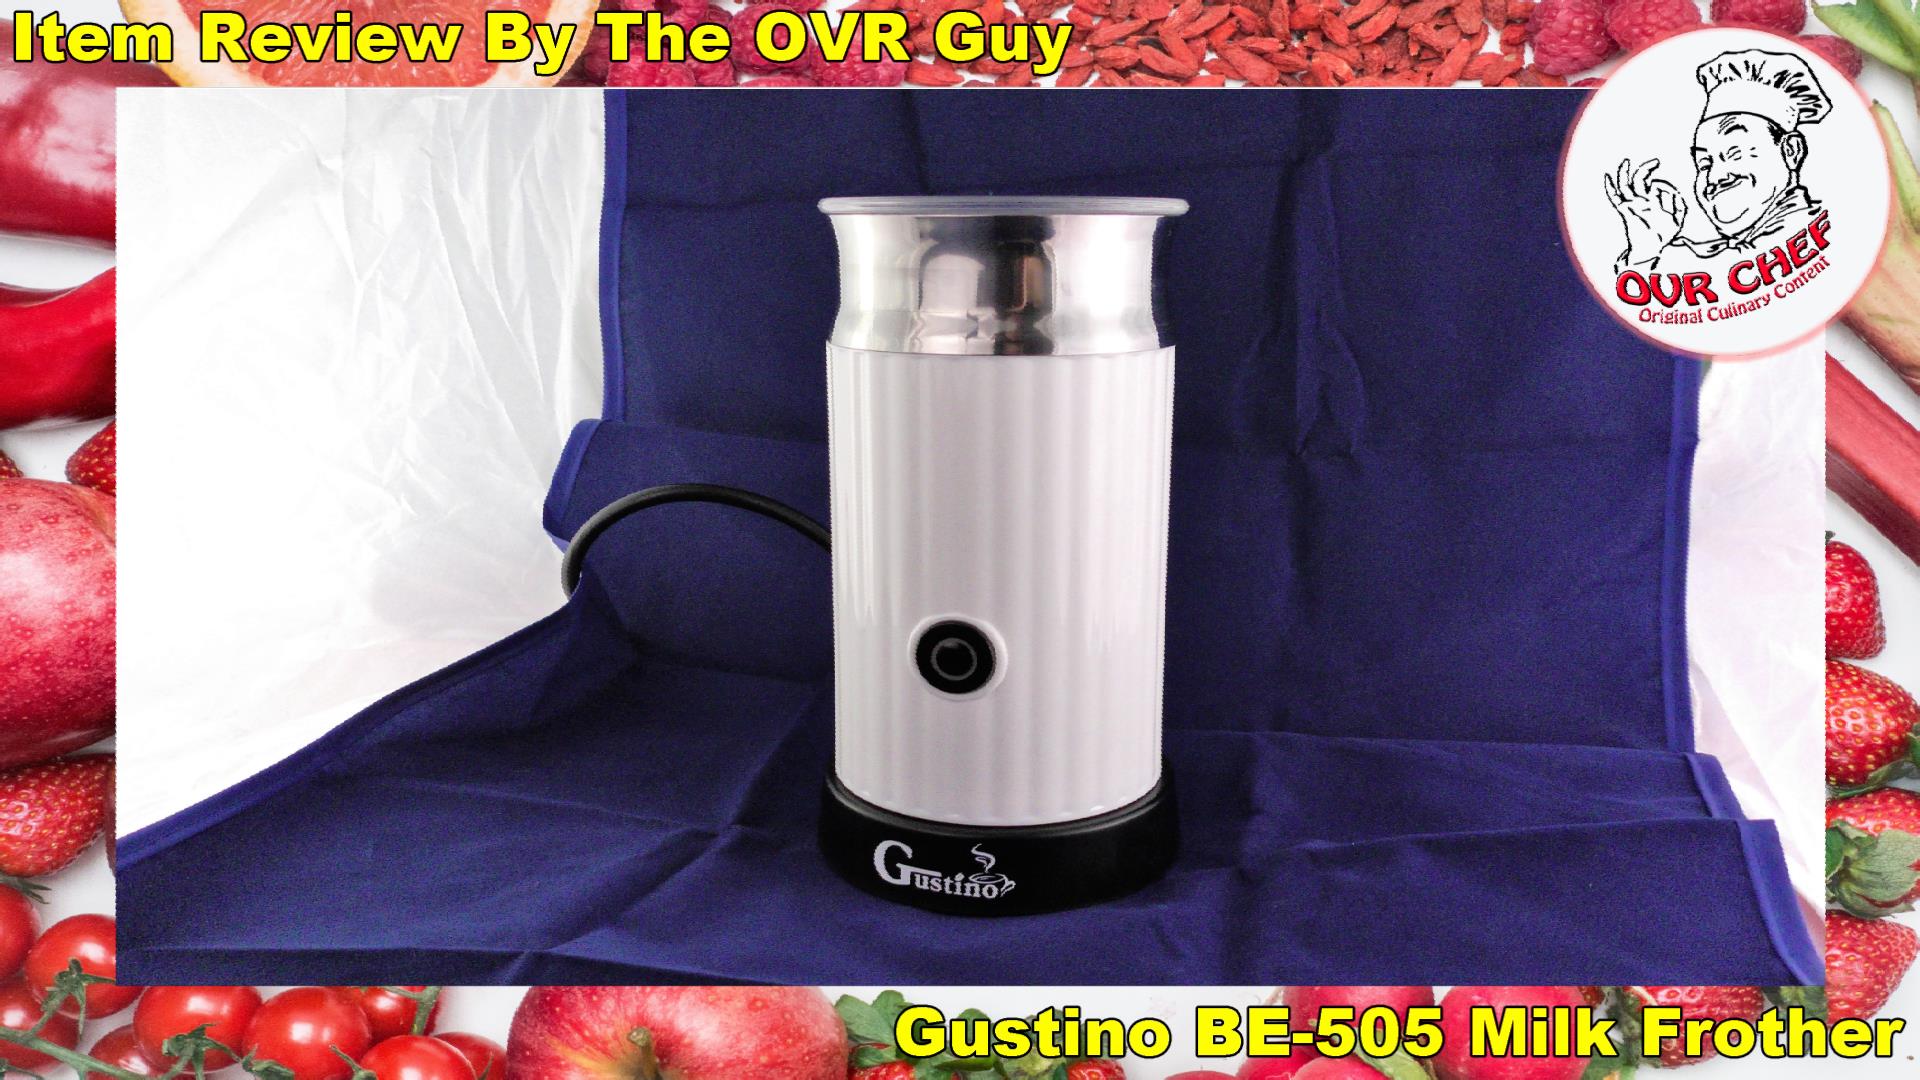 Gustino BE-505 Milk Frother (Review) - Original Video Reviews